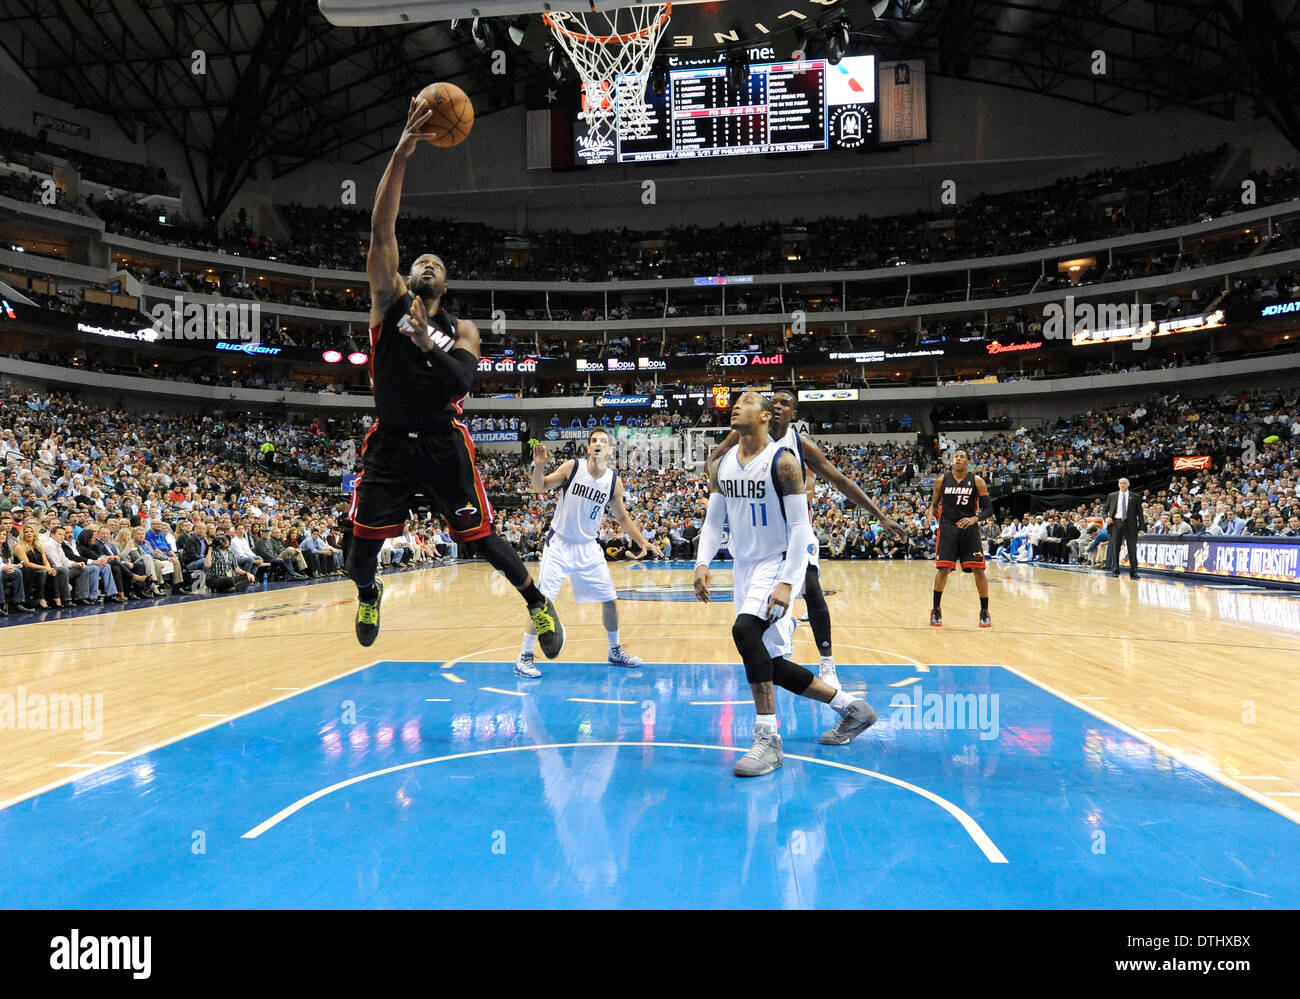 Dallas, TX, USA . 18th Feb, 2014. Miami Heat shooting guard Dwyane Wade #3 during an NBA game between the Miami Heat and the Dallas Mavericks at the American Airlines Center in Dallas, TX Miami defeated Dallas 117-106 Credit:  Cal Sport Media/Alamy Live News Stock Photo